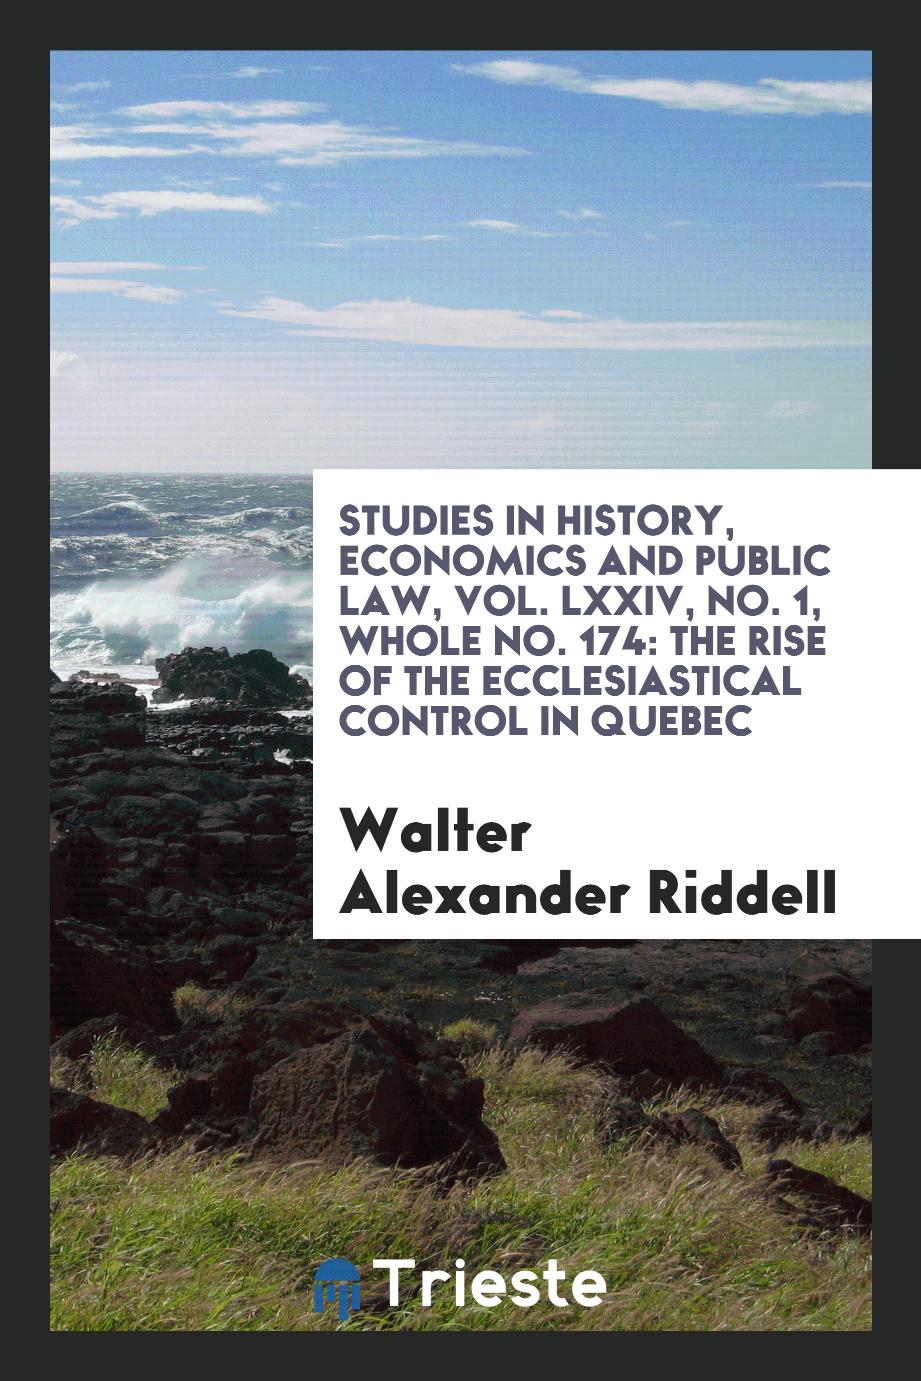 Studies in history, economics and public law, Vol. LXXIV, No. 1, Whole No. 174: The rise of the ecclesiastical control in Quebec